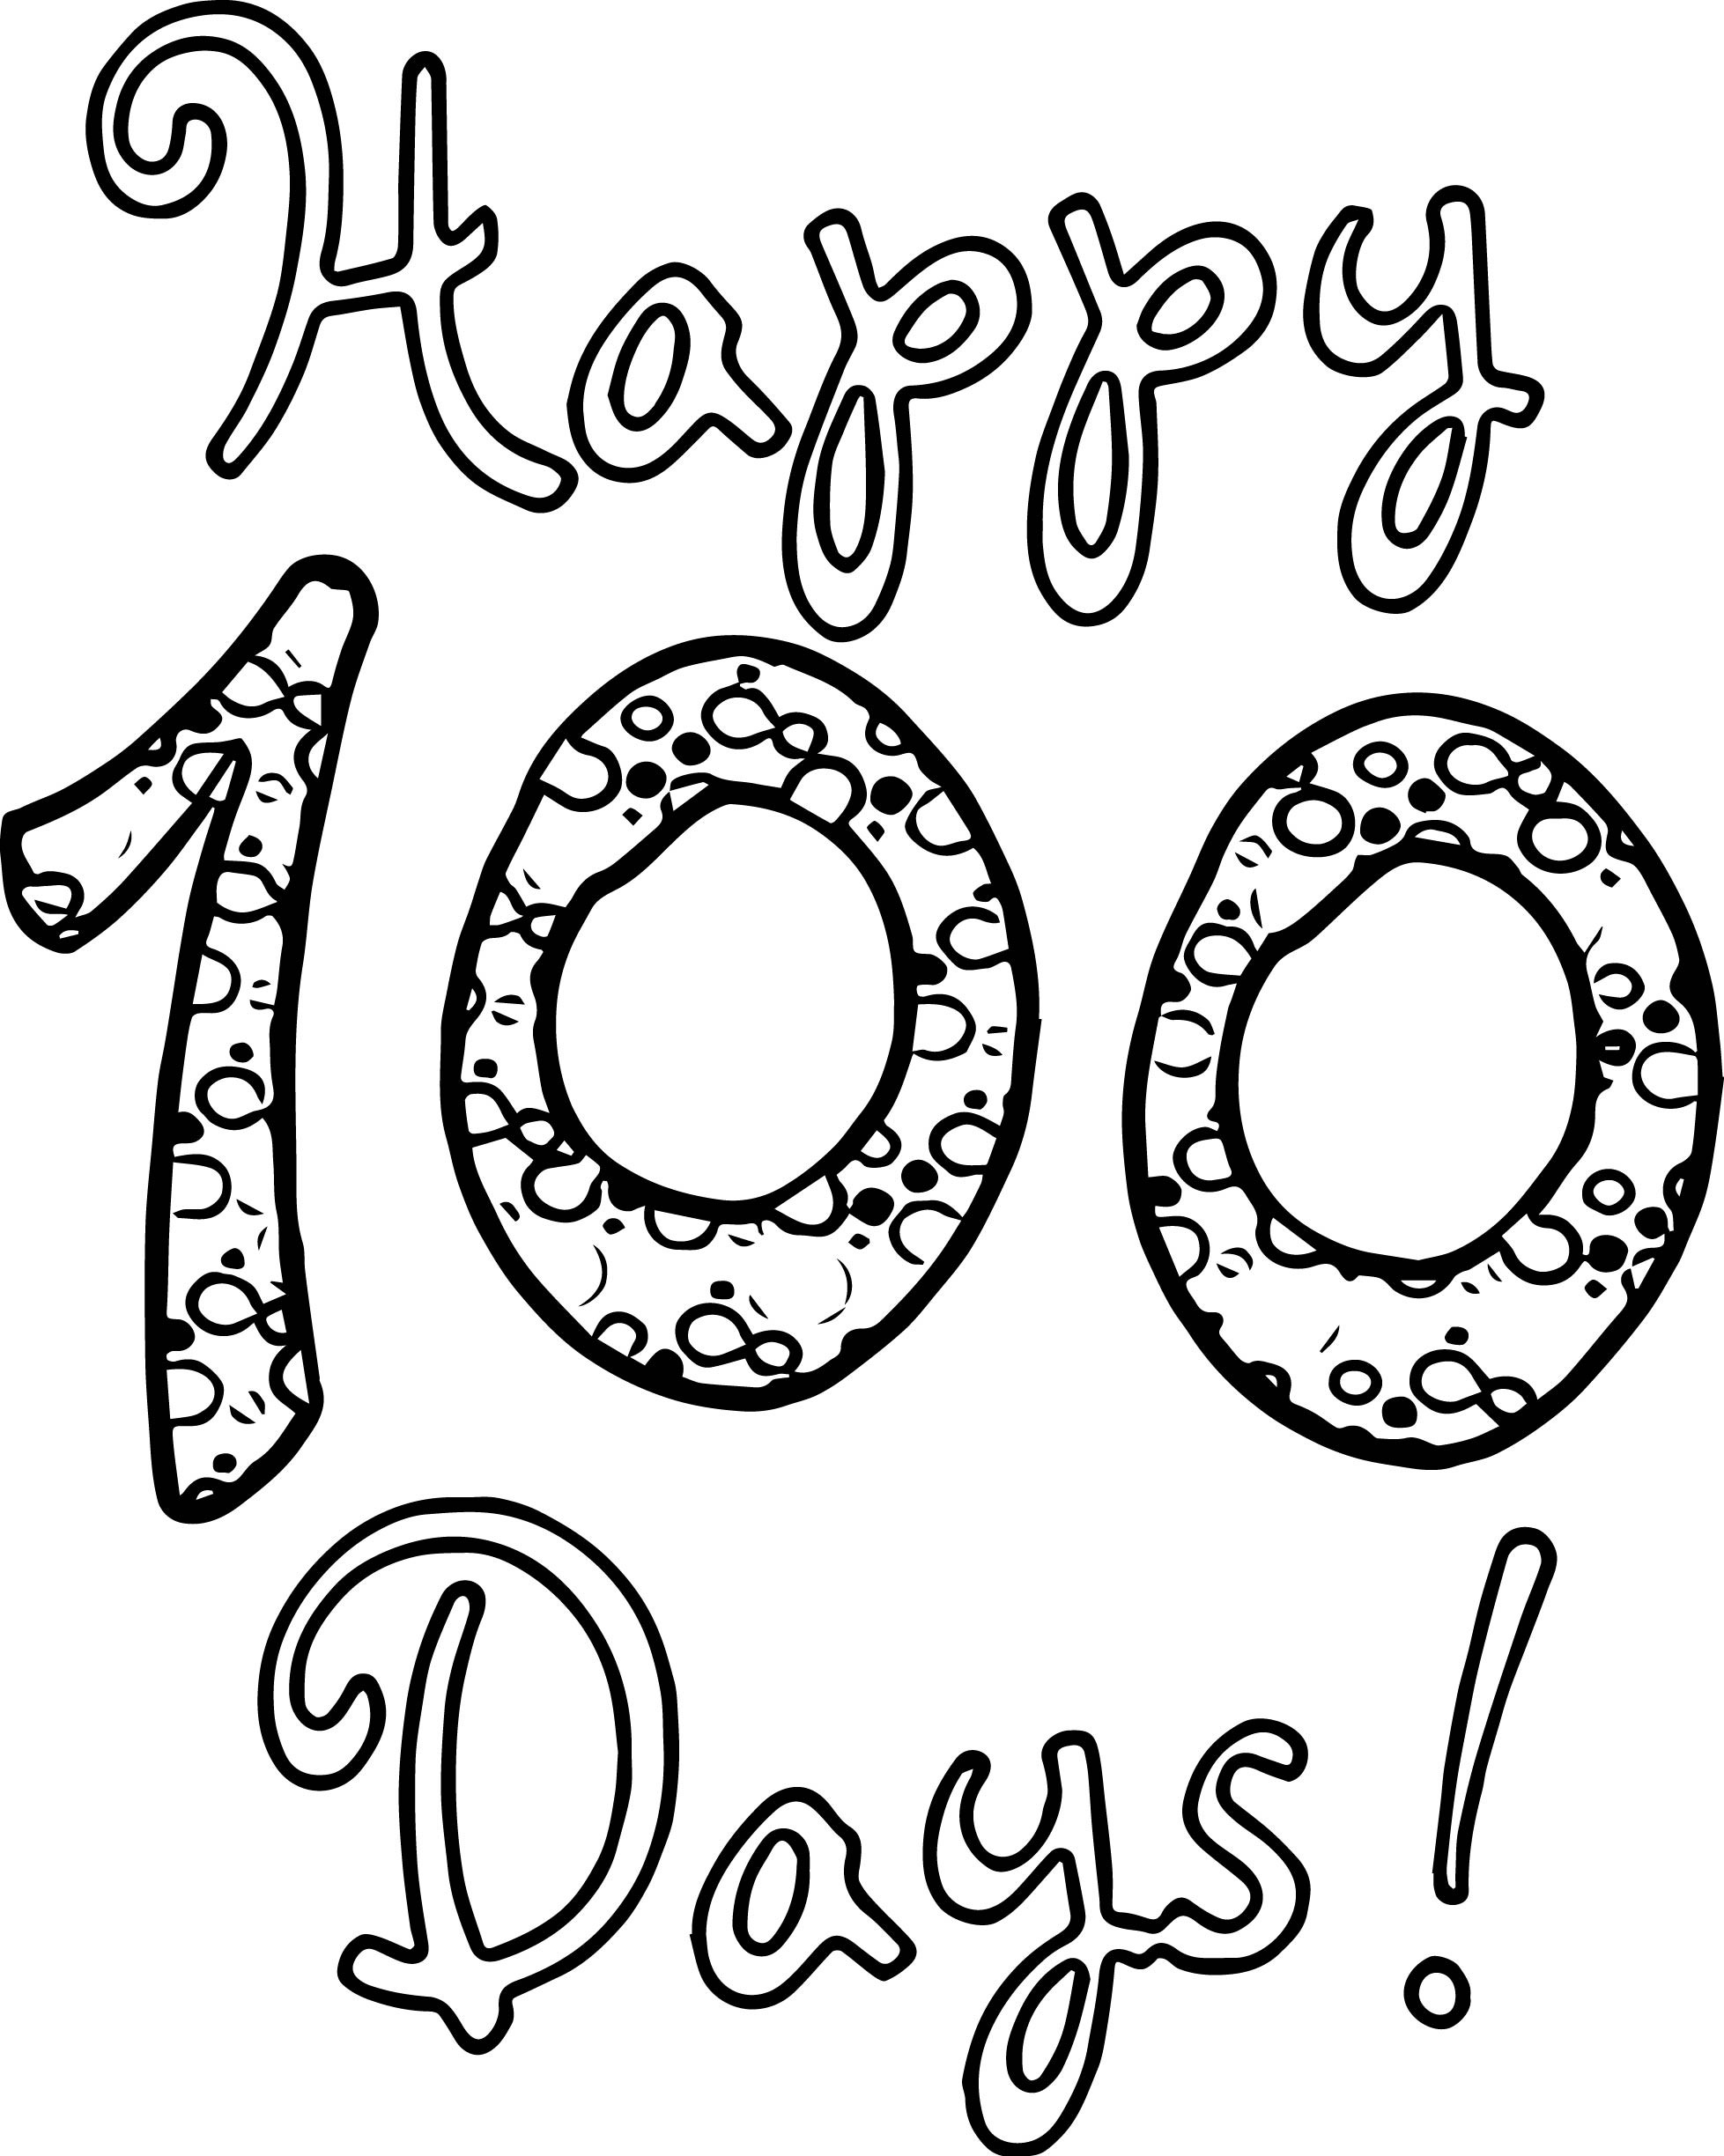 100 Days Coloring Pages
 Happy 100 Days School Coloring Page